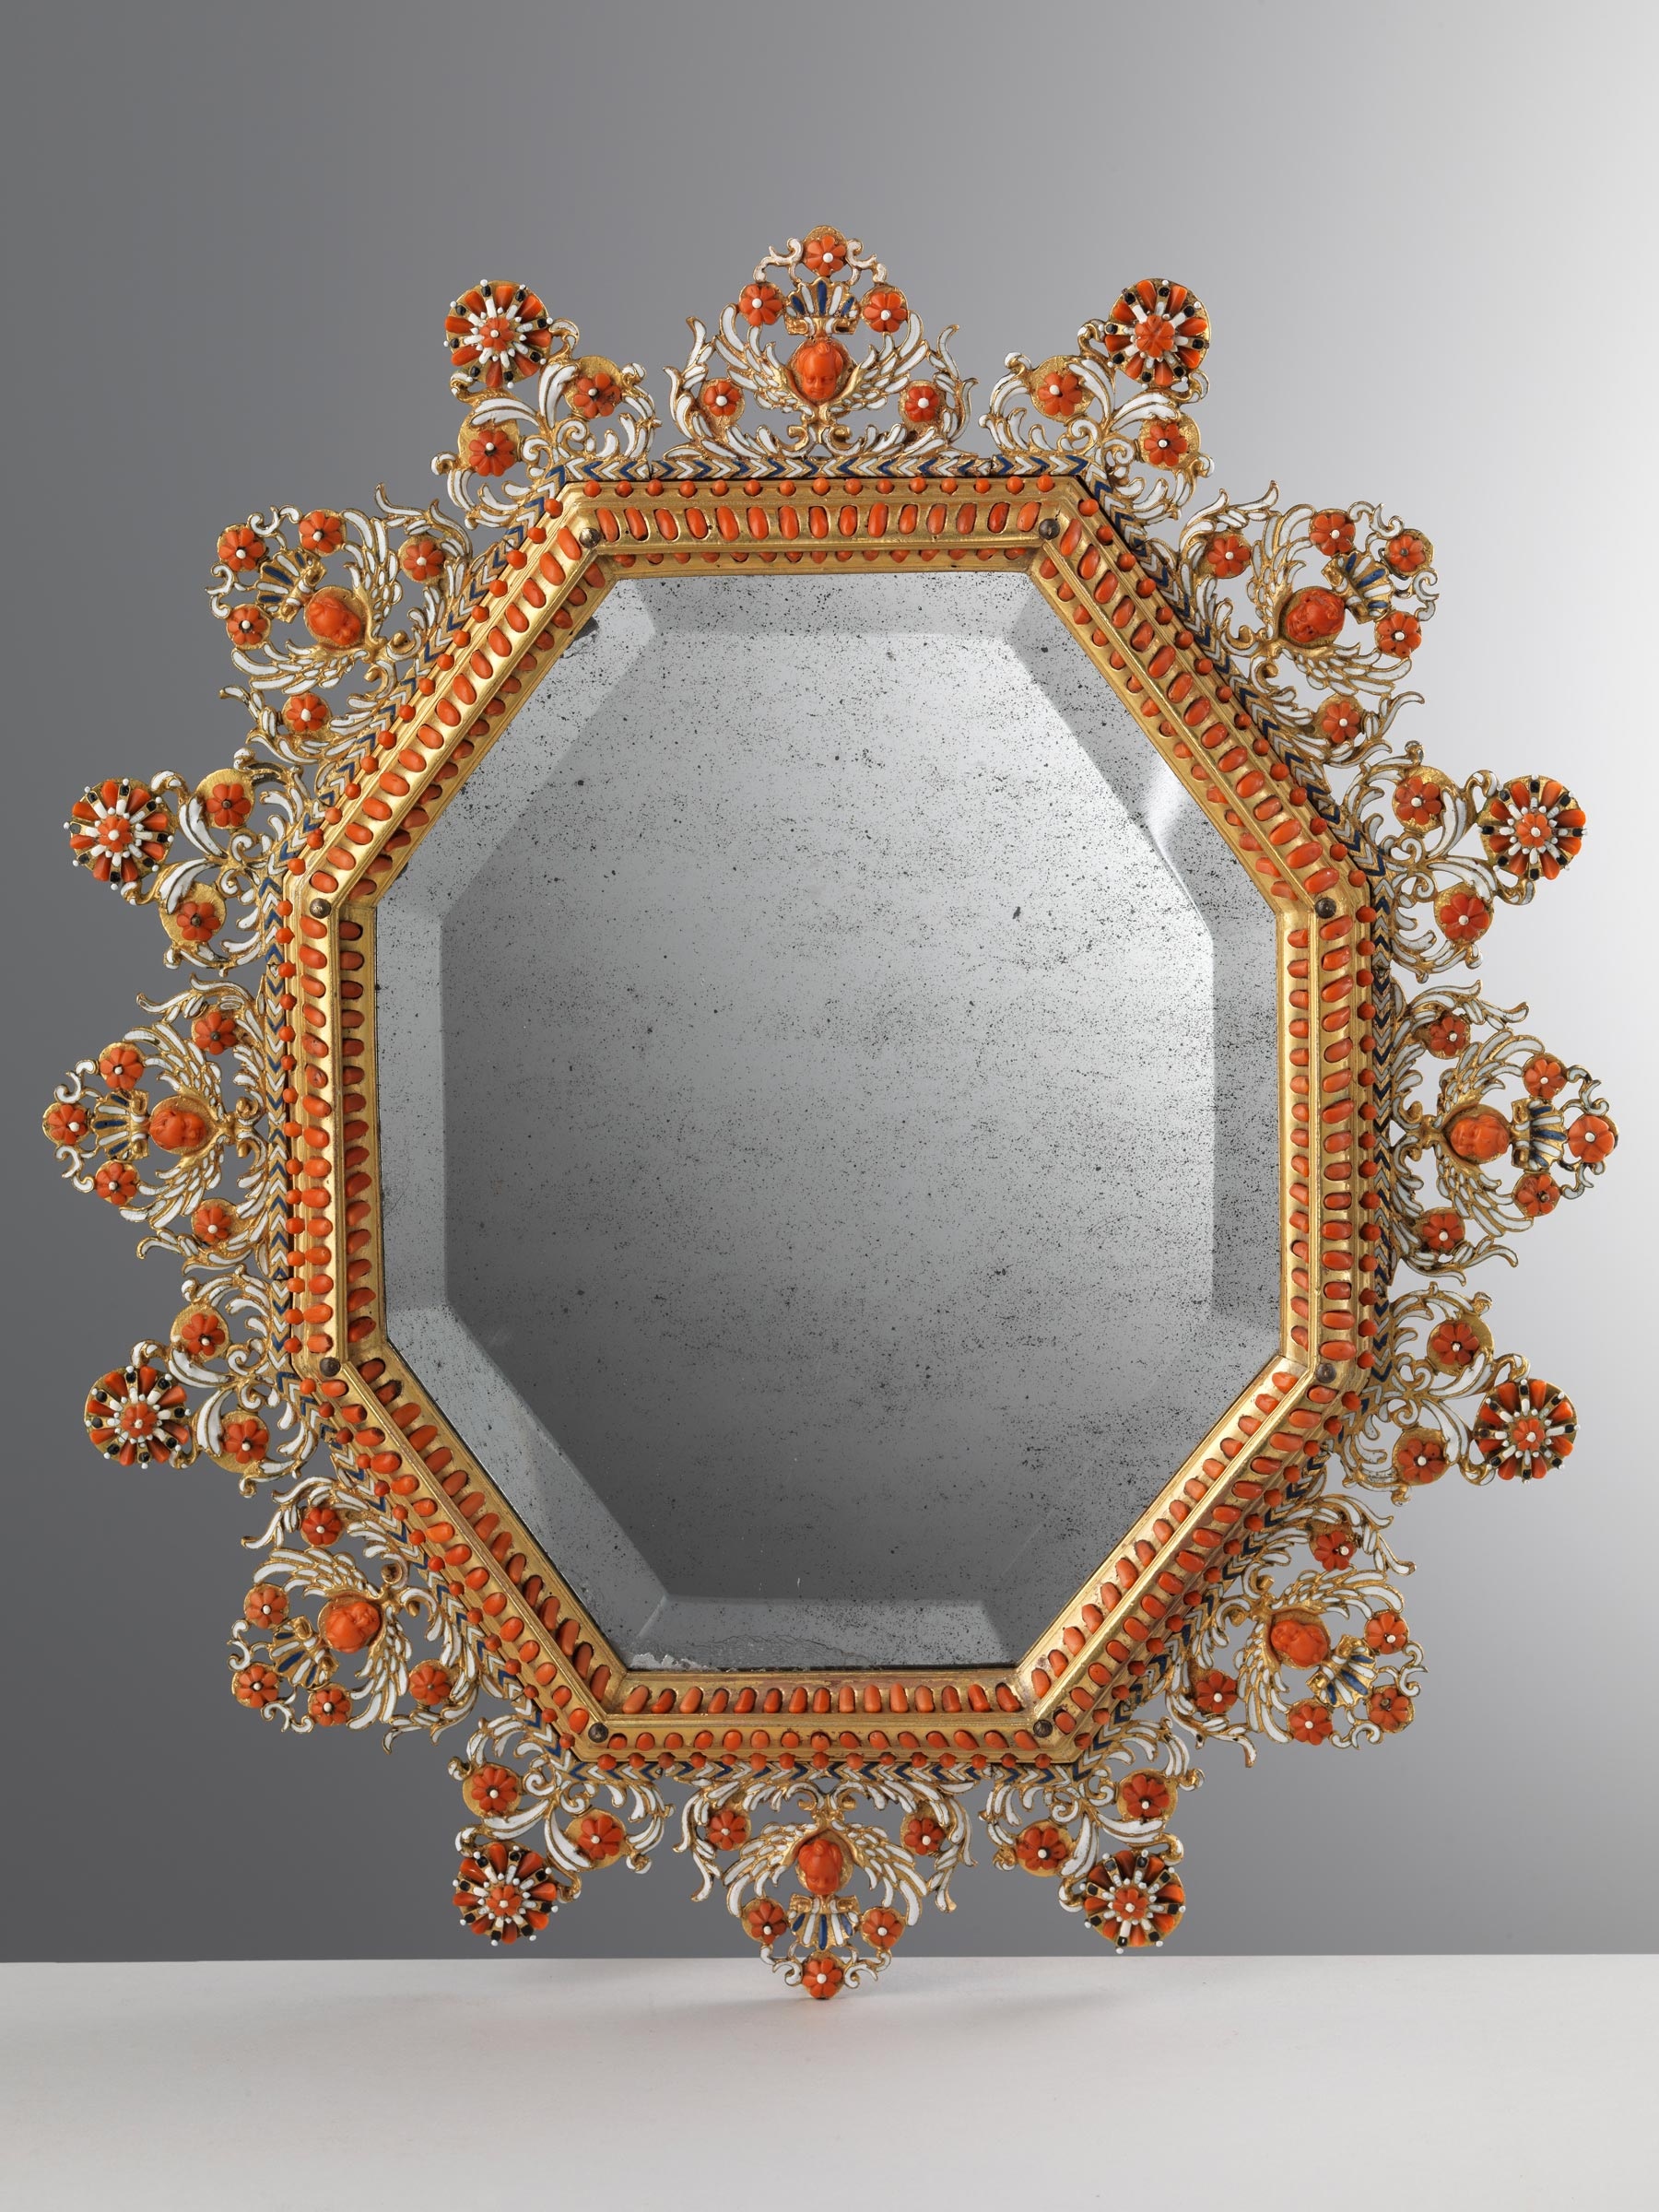 Trapani coral workshops - Frame with mirror